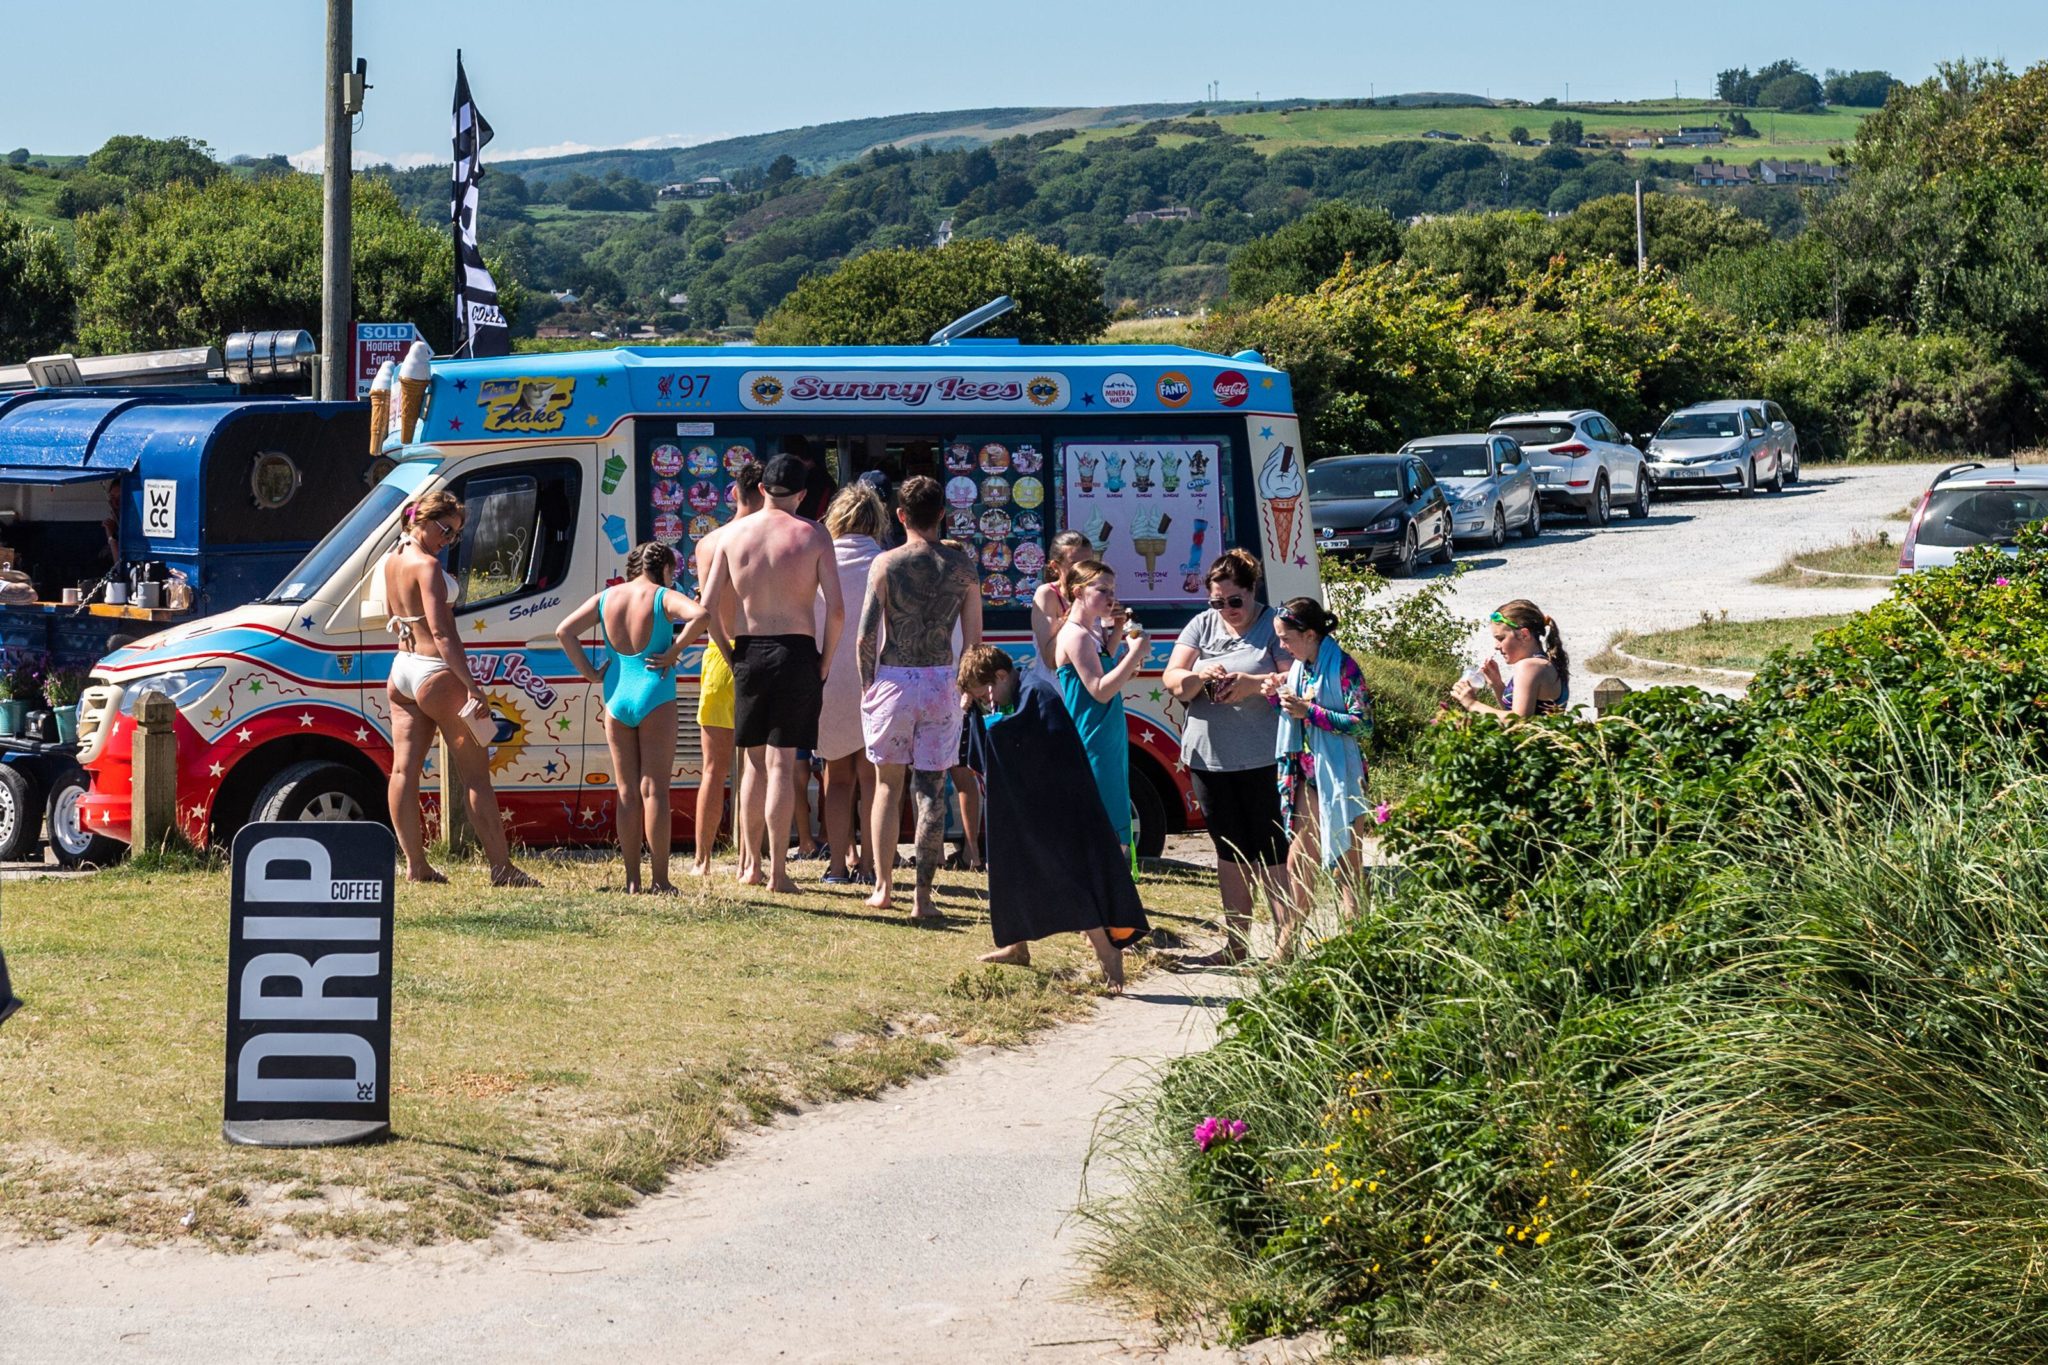 Hundreds of tourists and locals hit the beach at Rosscarbery in West Cork, 10-07-2022. Image: AG News/Alamy Live News